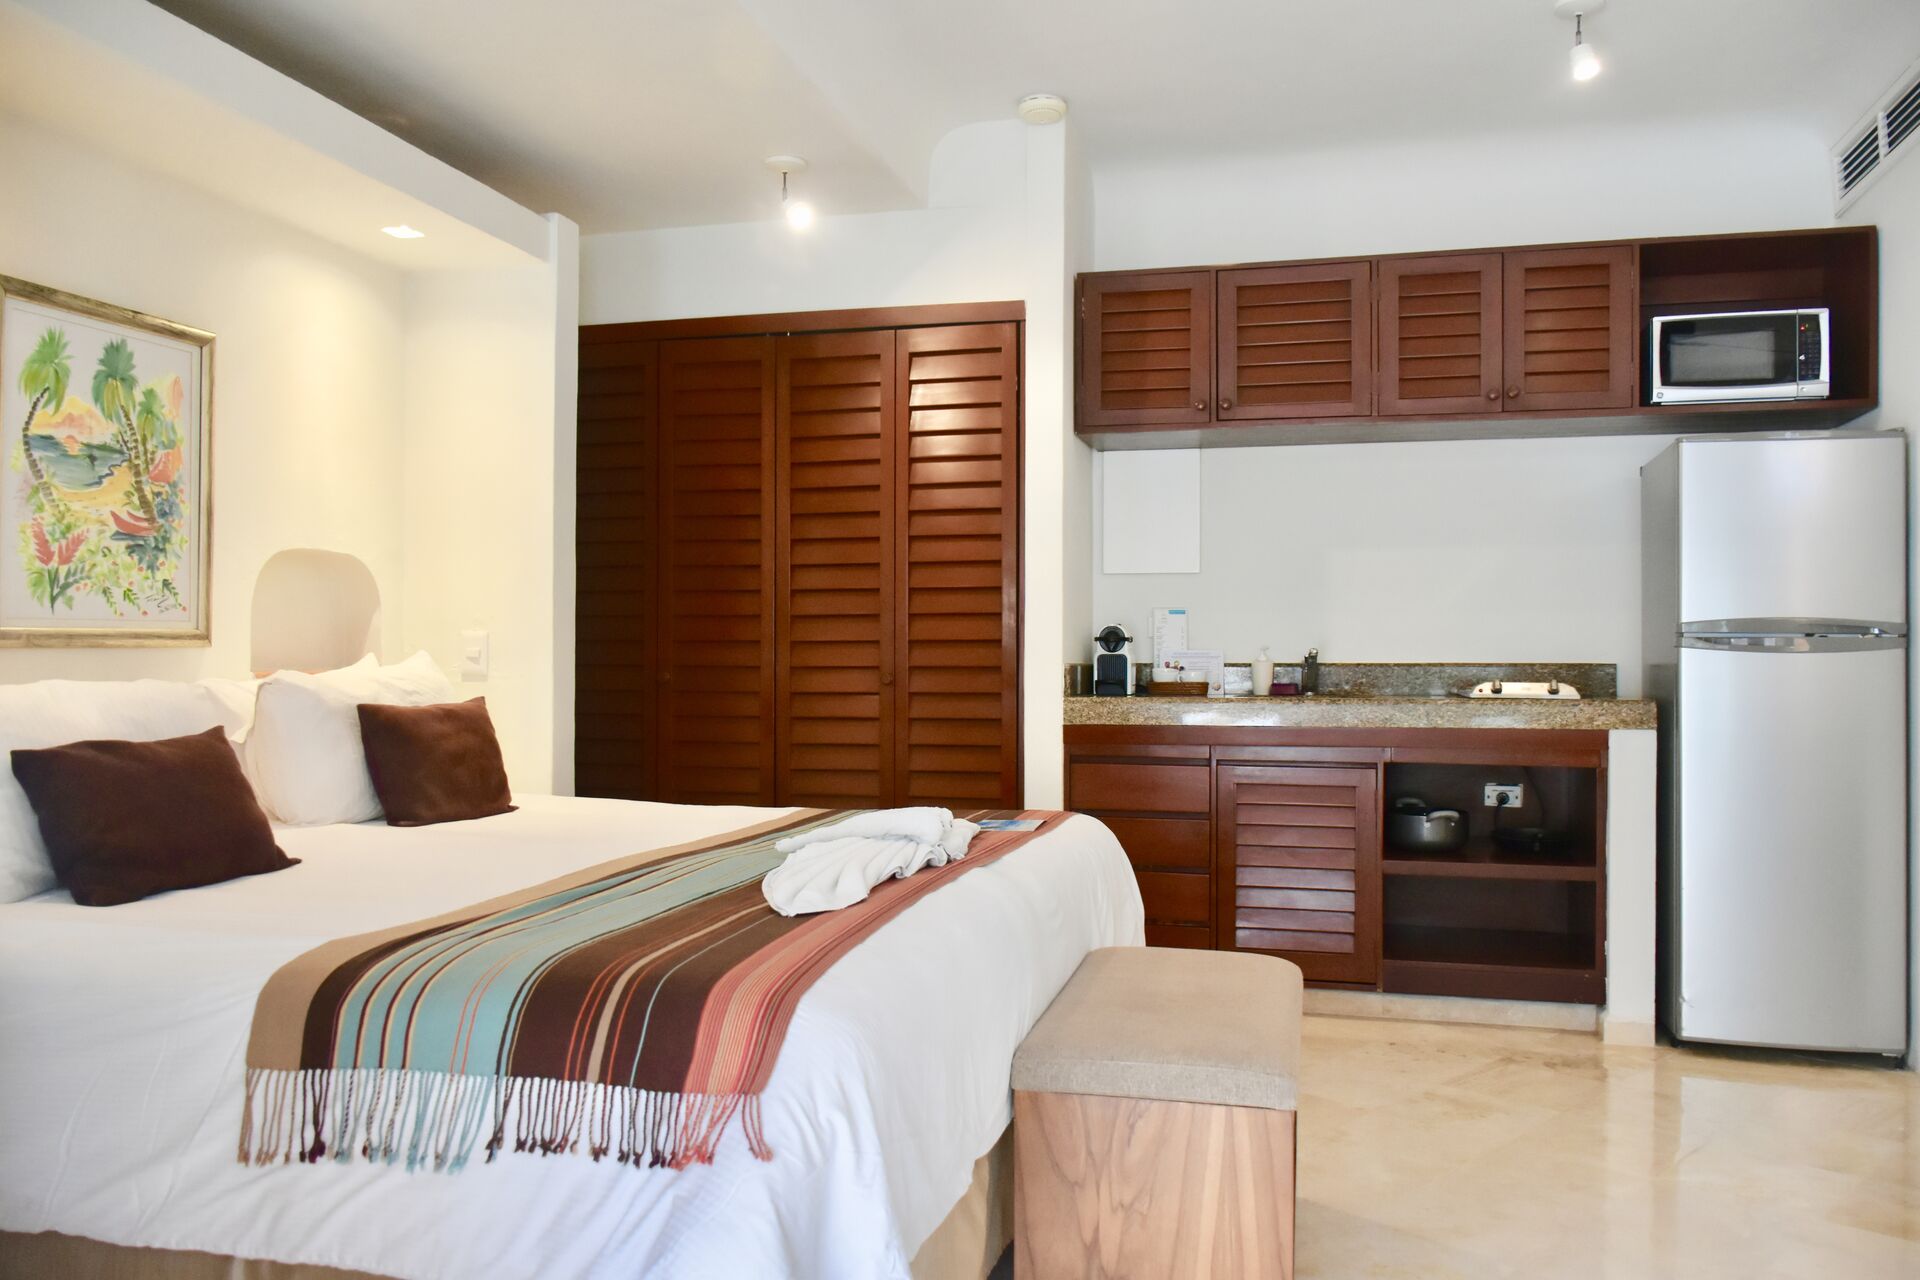 Ocean view room with kitchenette.